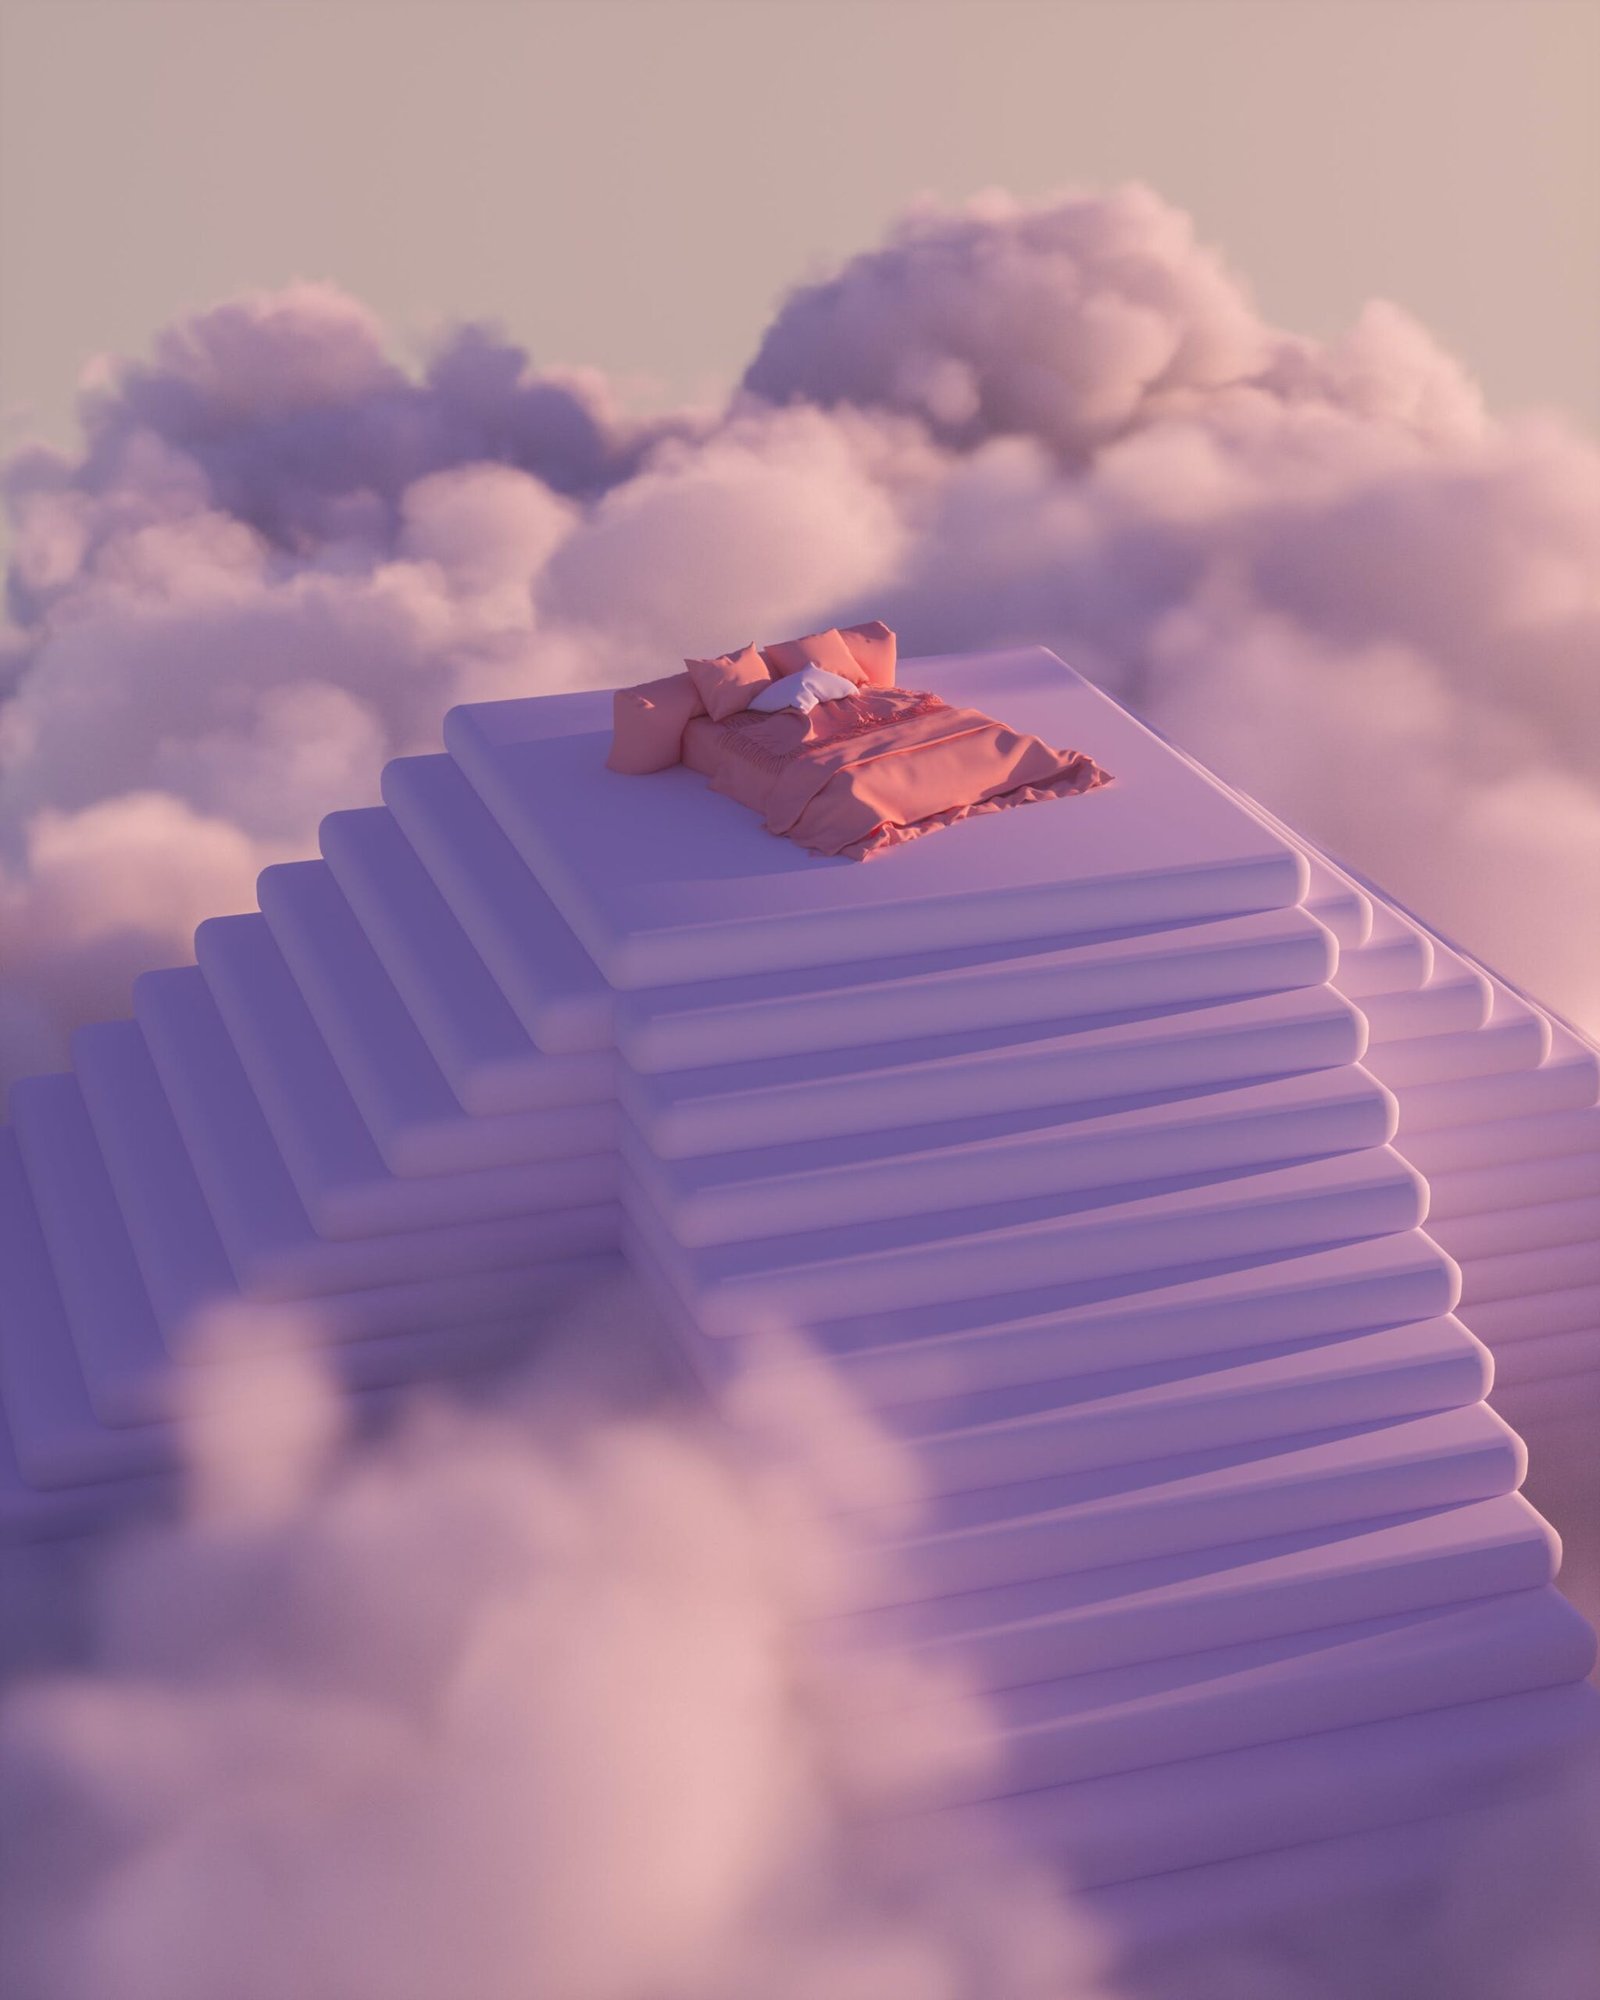 A bed atop a pyramid in the clouds, illustrating the feeling of lucid dreaming